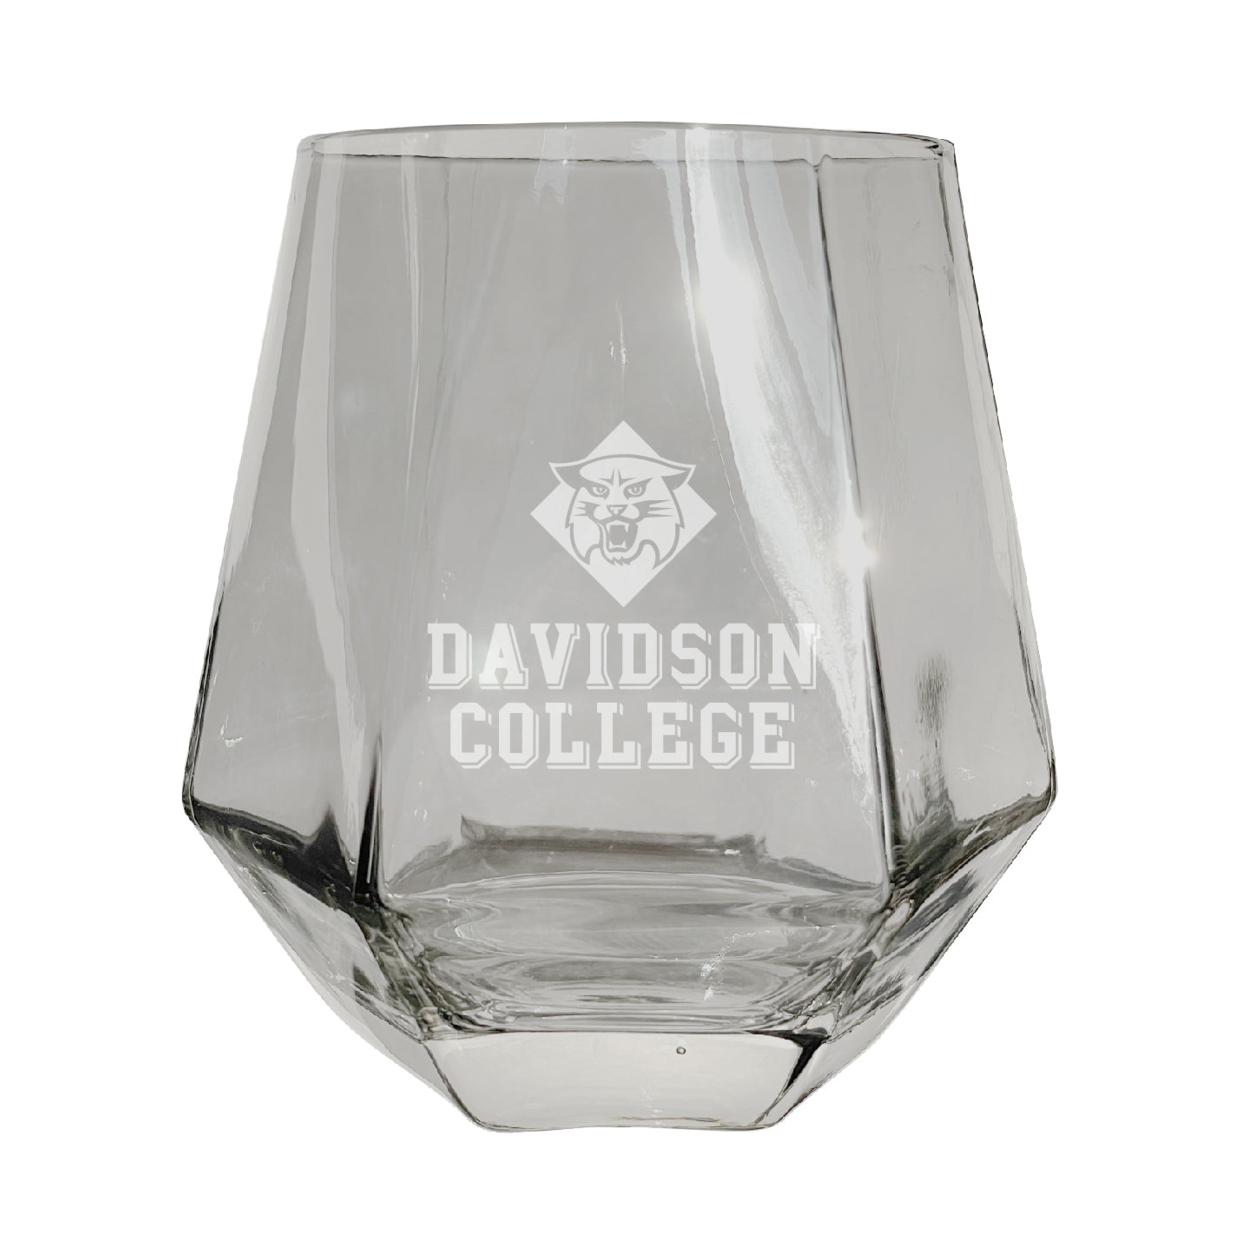 Davidson College Etched Diamond Cut Stemless 10 Ounce Wine Glass Clear